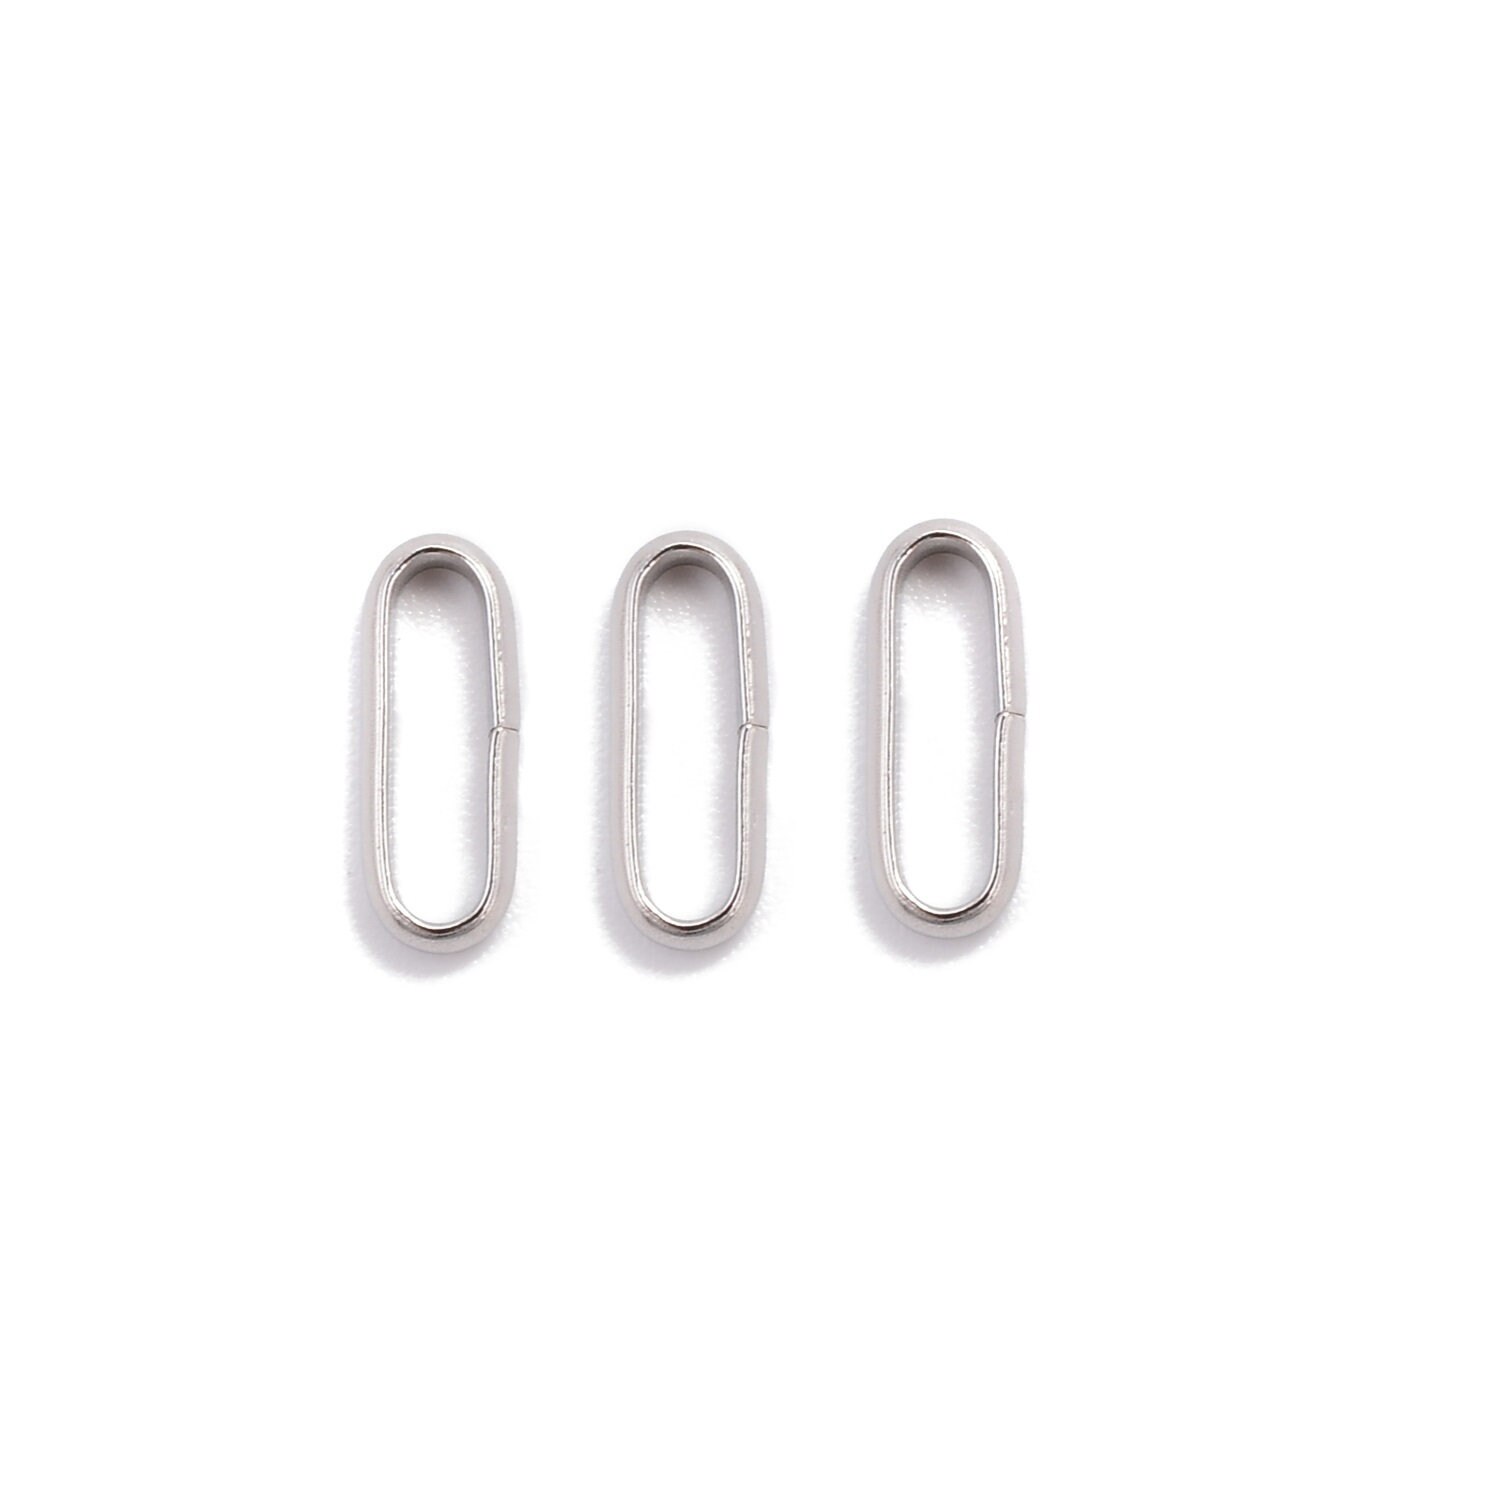 150pcs 5 Styles Stainless Steel Quick Link Connectors Mixed Shapes Link  Connector Unsoldered Connector for Bracelet Necklace Jewelry Making 7-15mm  